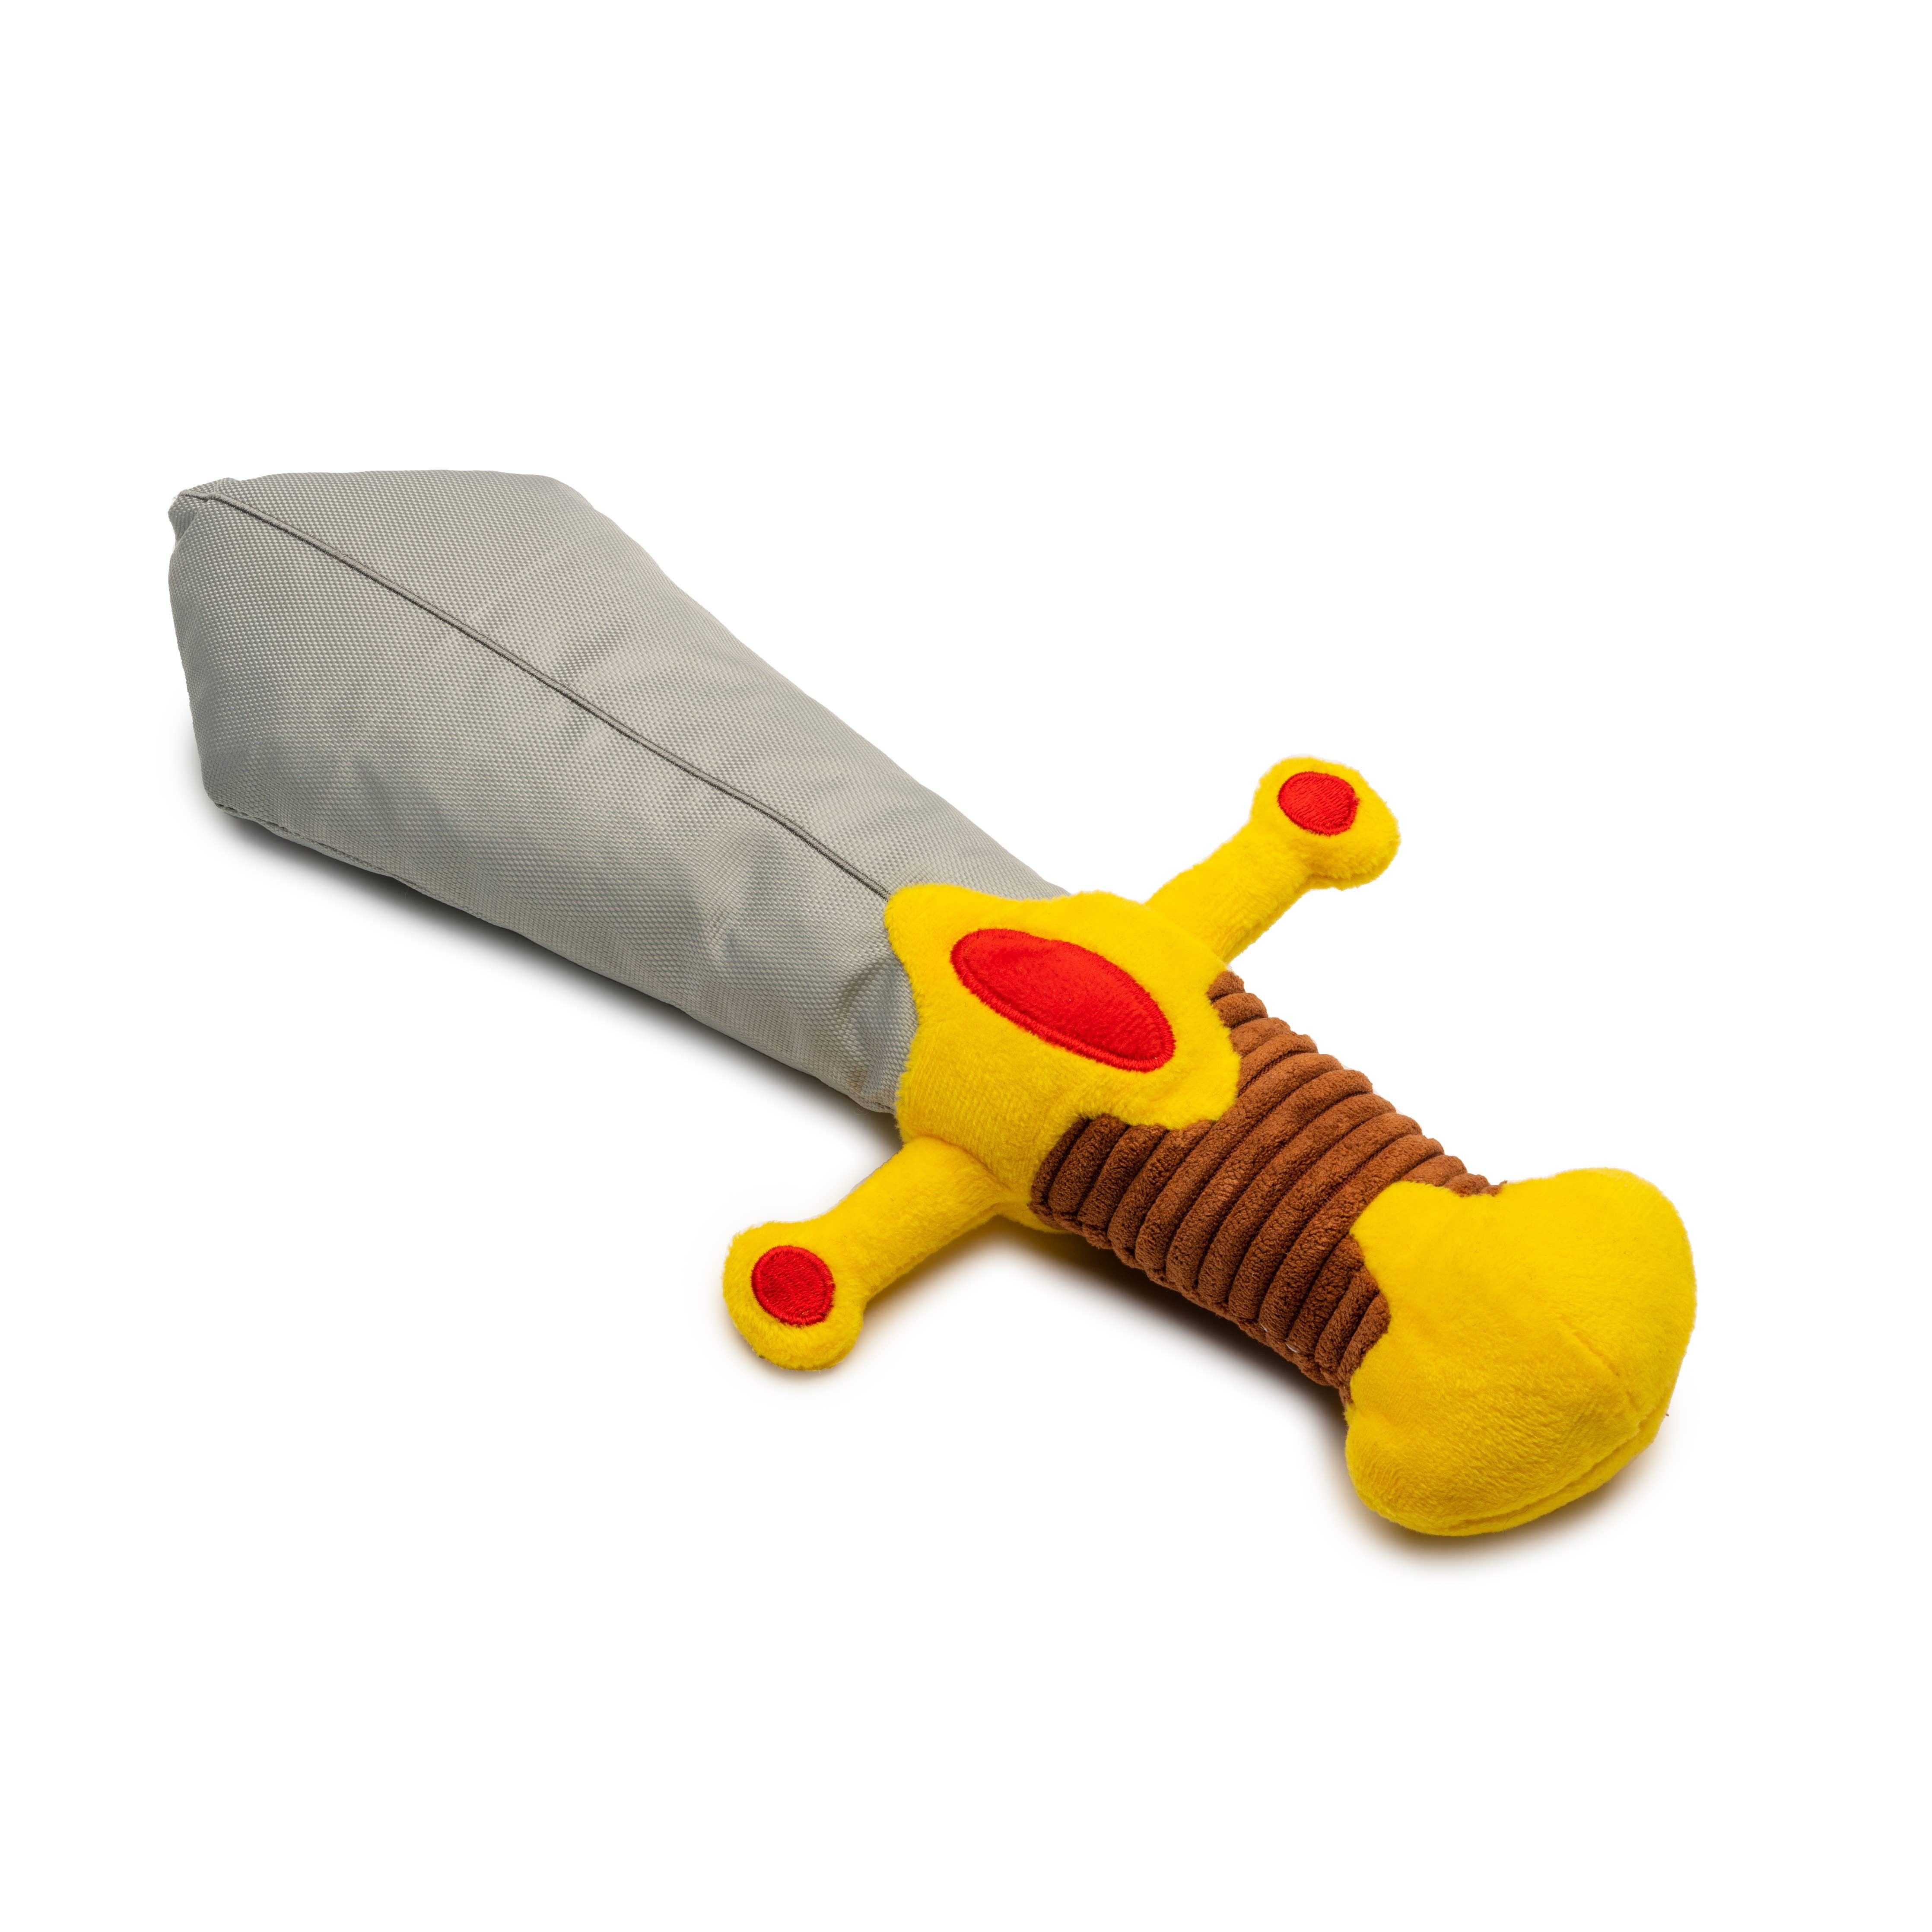 Paladin's Sword Crinkle Toy by Pawlymorph - Bards & Cards